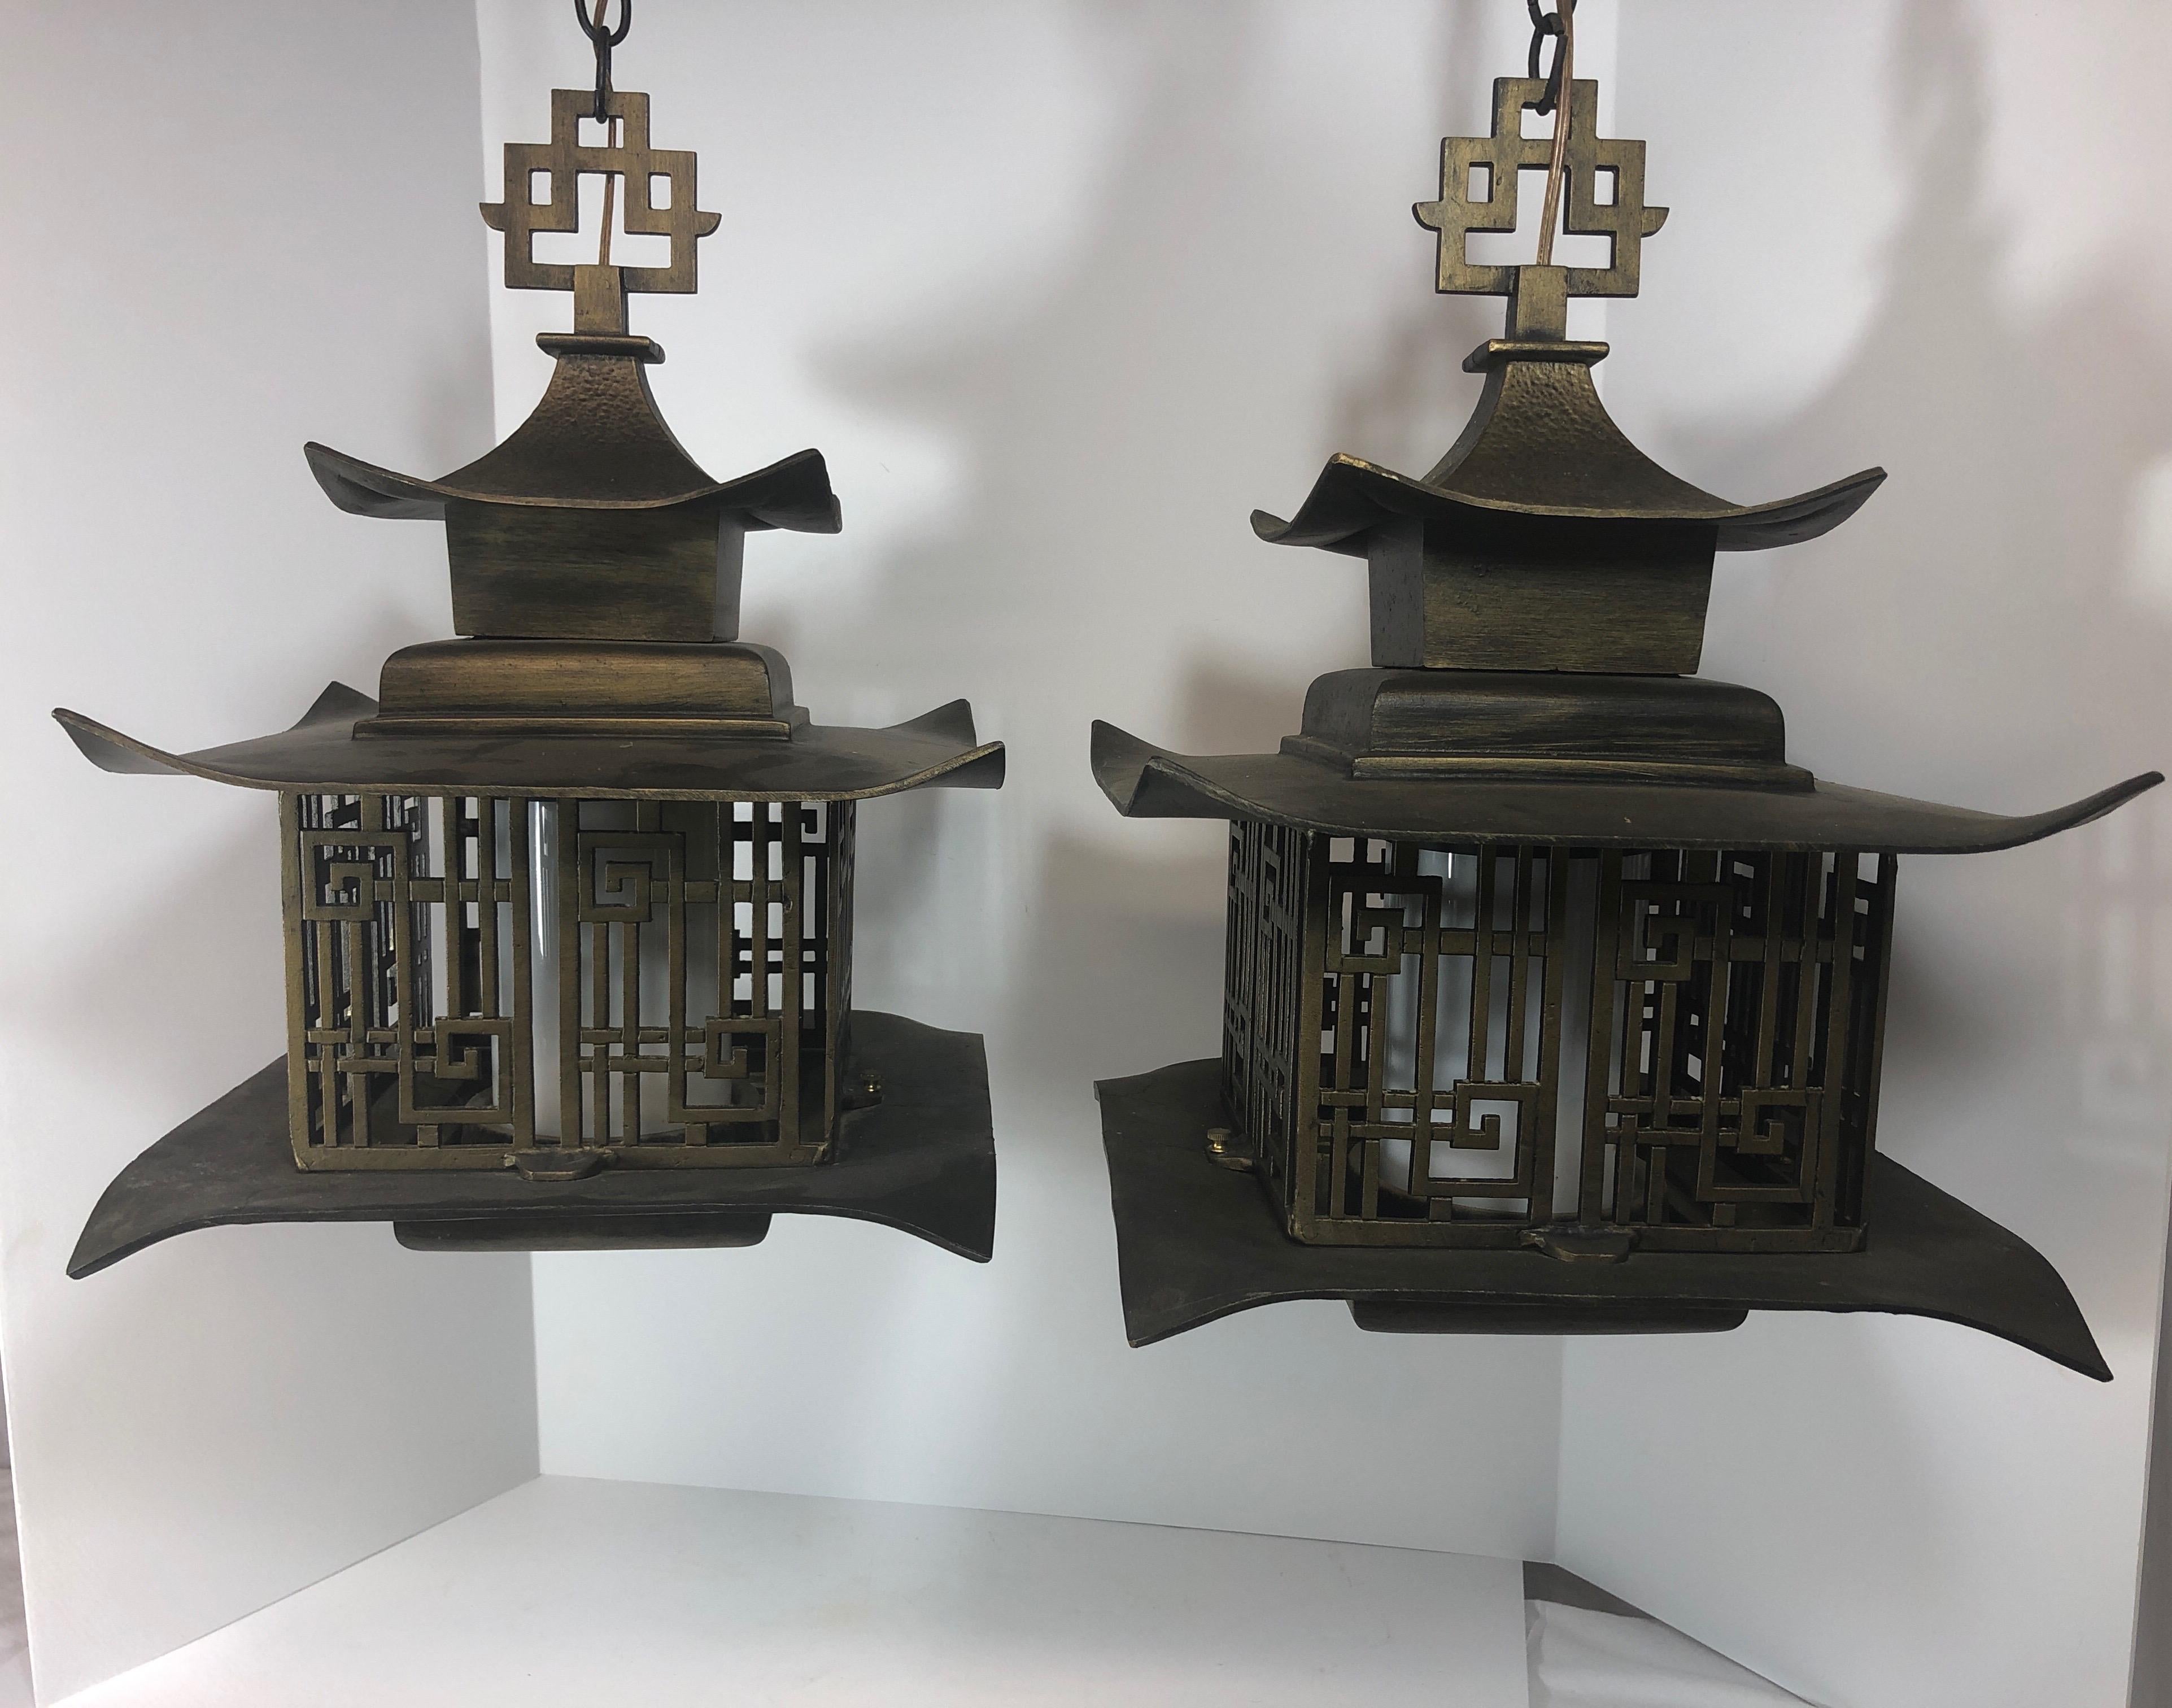 Pair of vintage Chinese pagoda lanterns or chandeliers. Made of cast iron with patinated antique brass finish. Single bulb inside white glass shade. Both in working order. 60